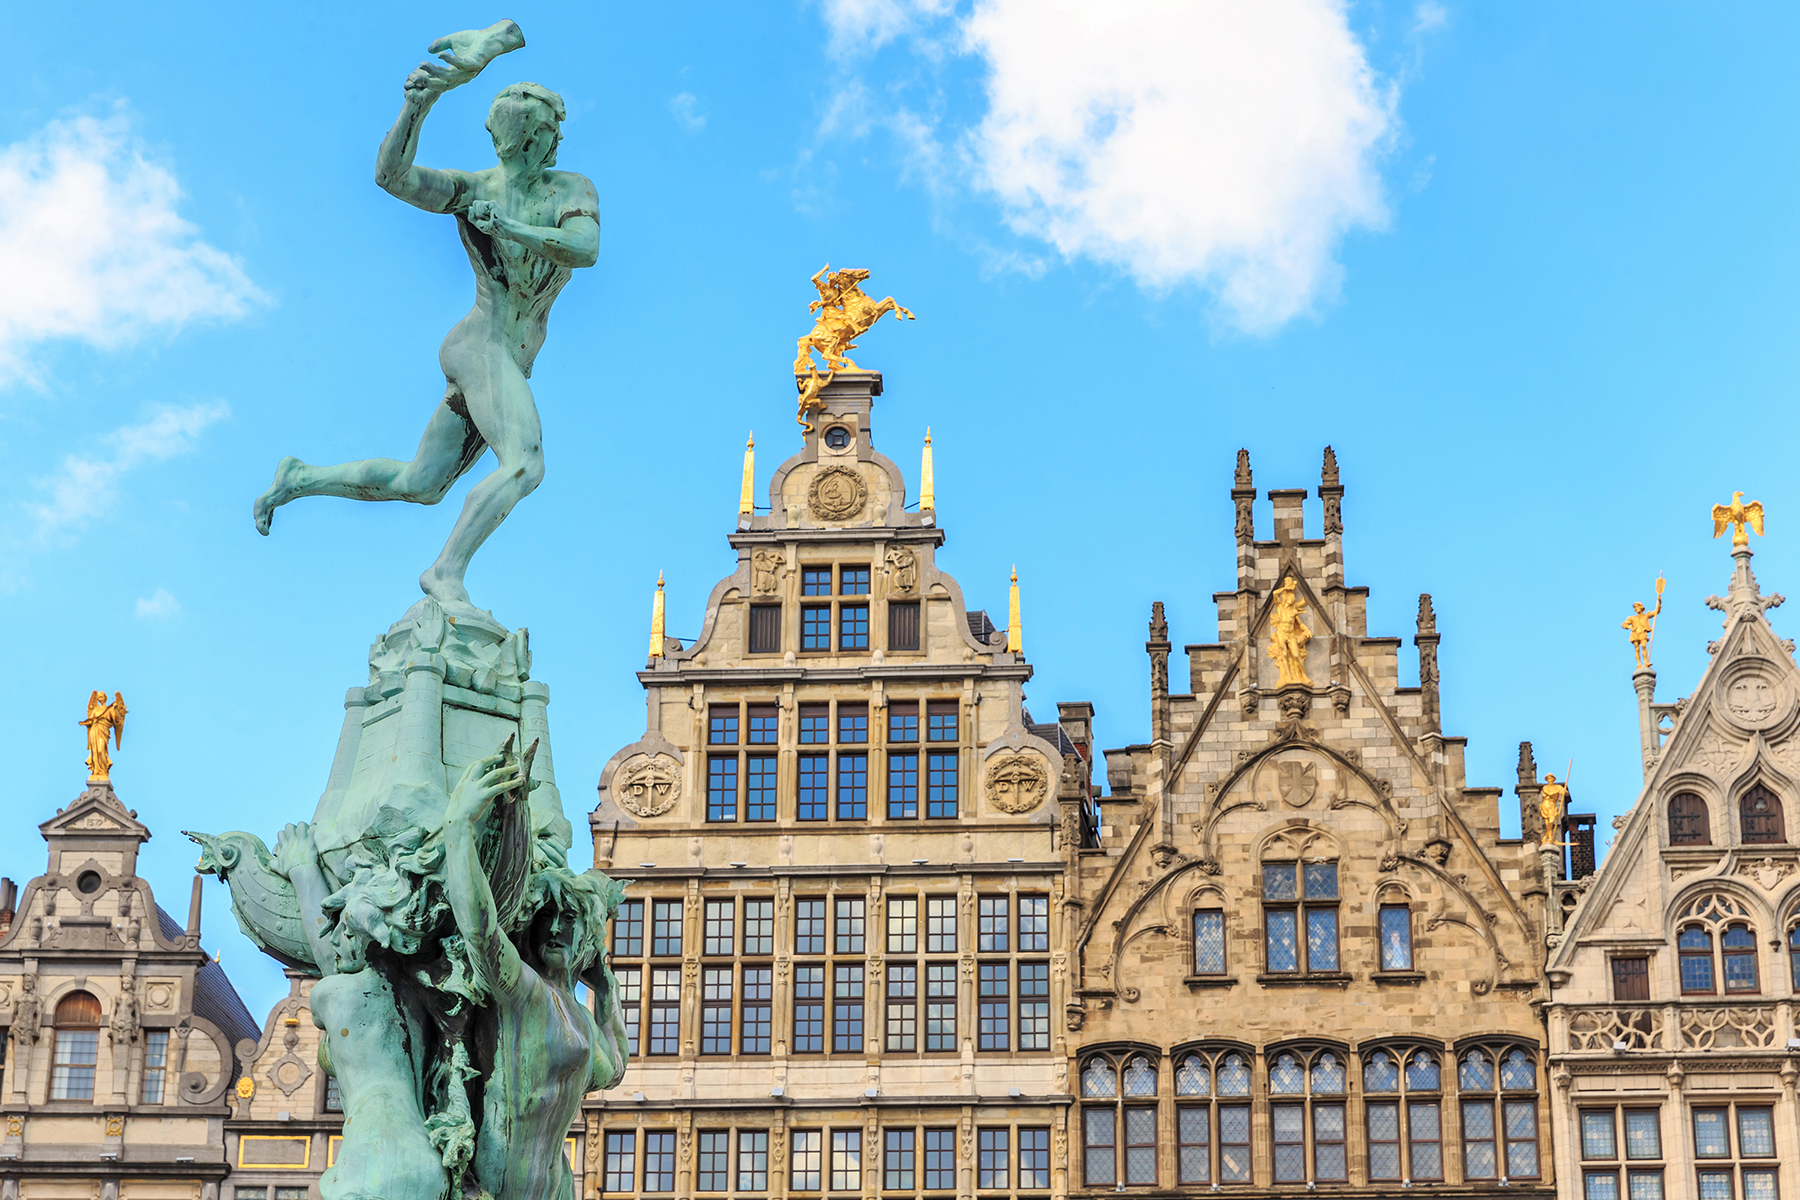 Statue in front of historic buildings in Amsterdam